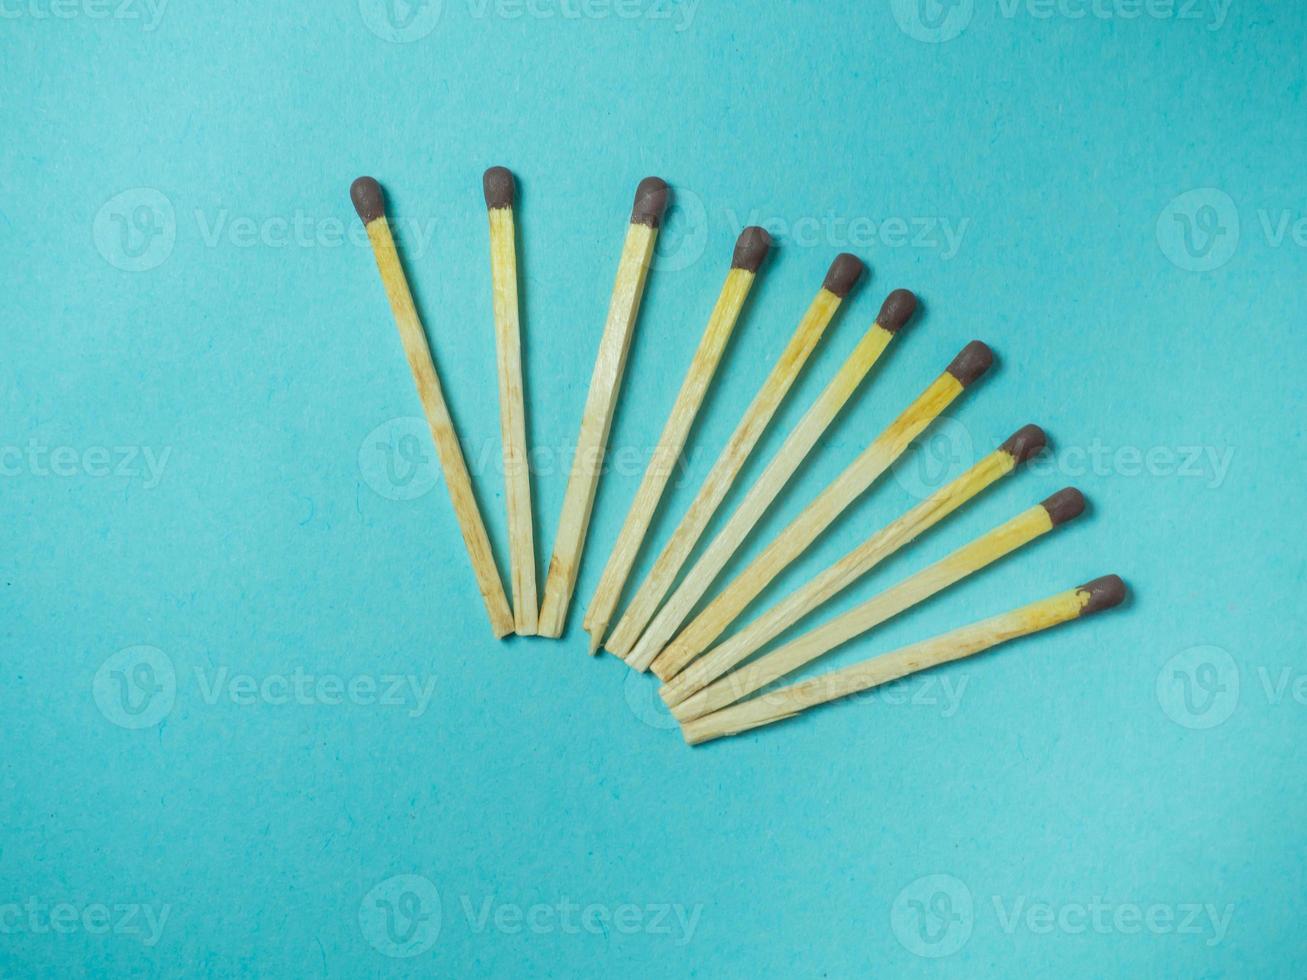 Matches on a blue background. Fire-starting products photo